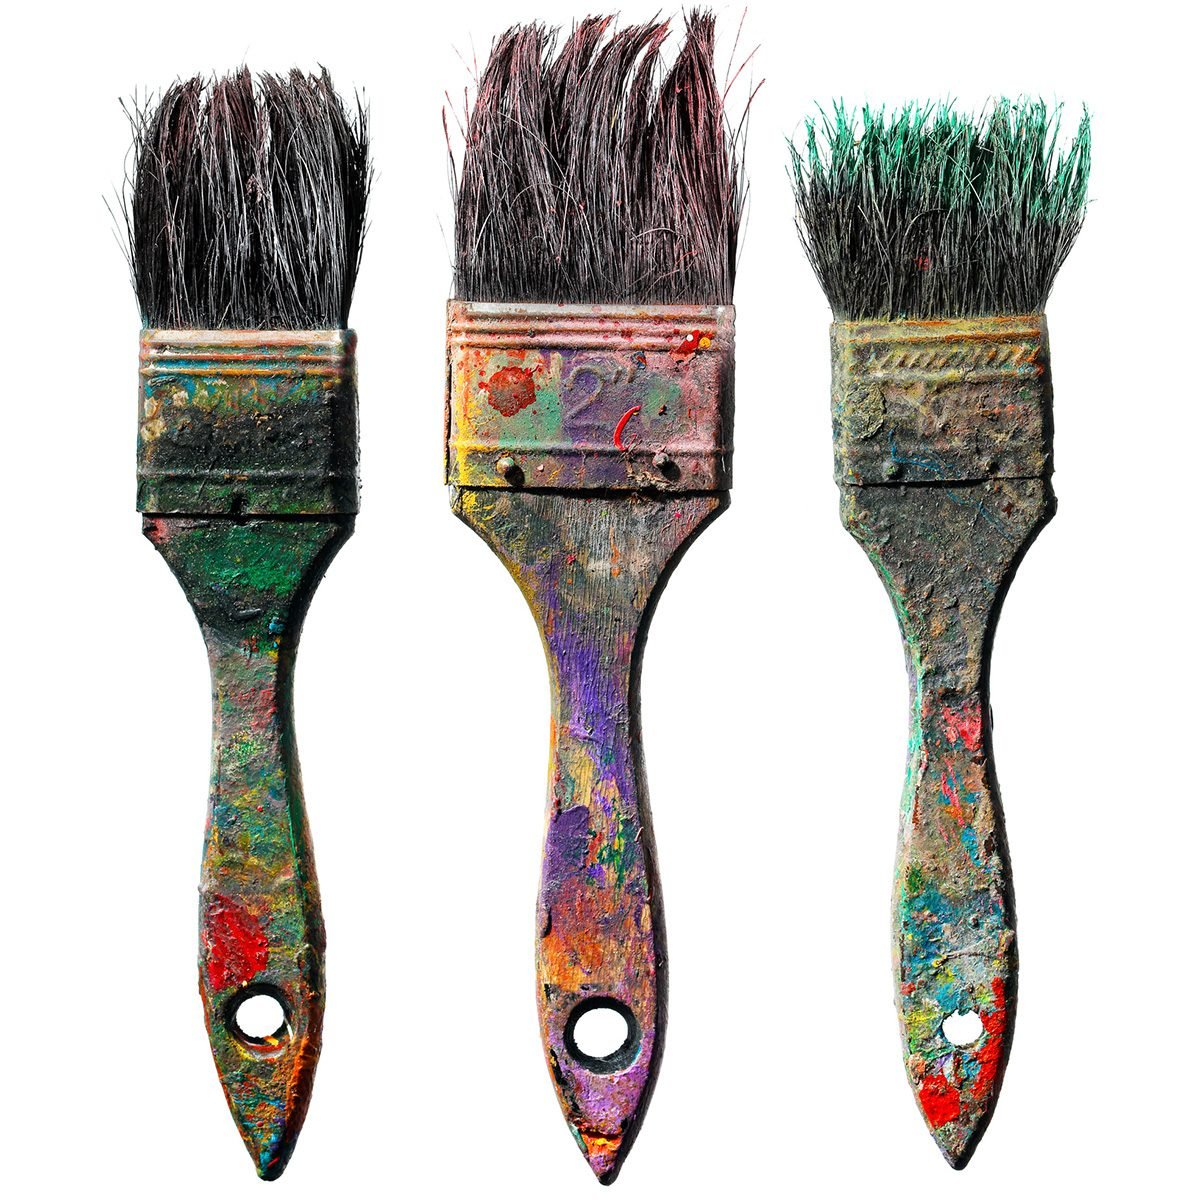 Fastest and Neatest Way to Clean Your Paintbrushes 